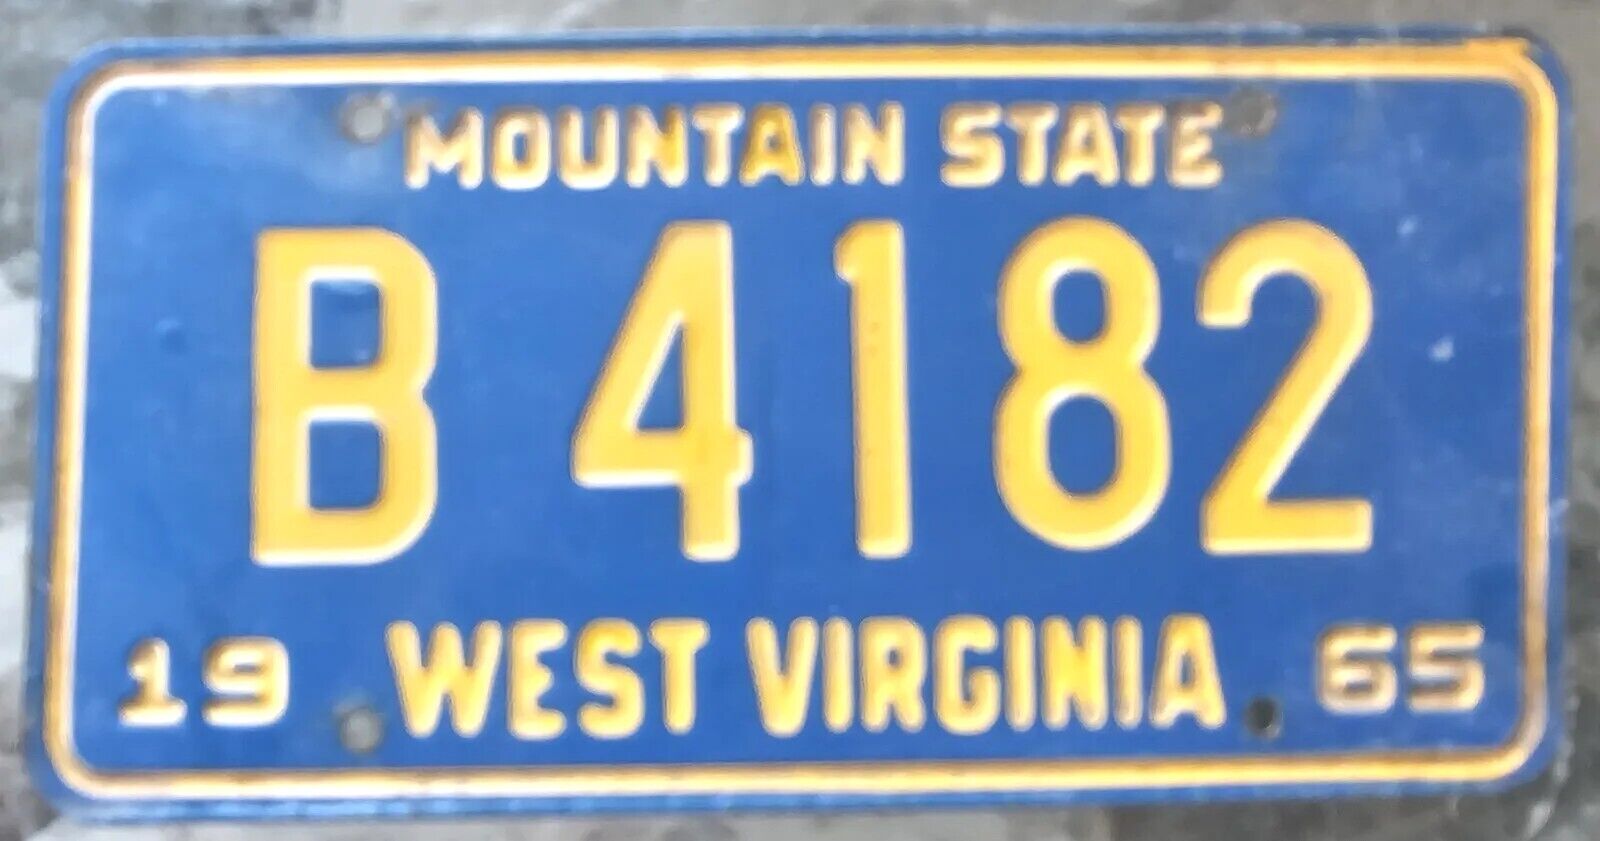 West Virginia License Plate 1965 B 4182 Mountain State